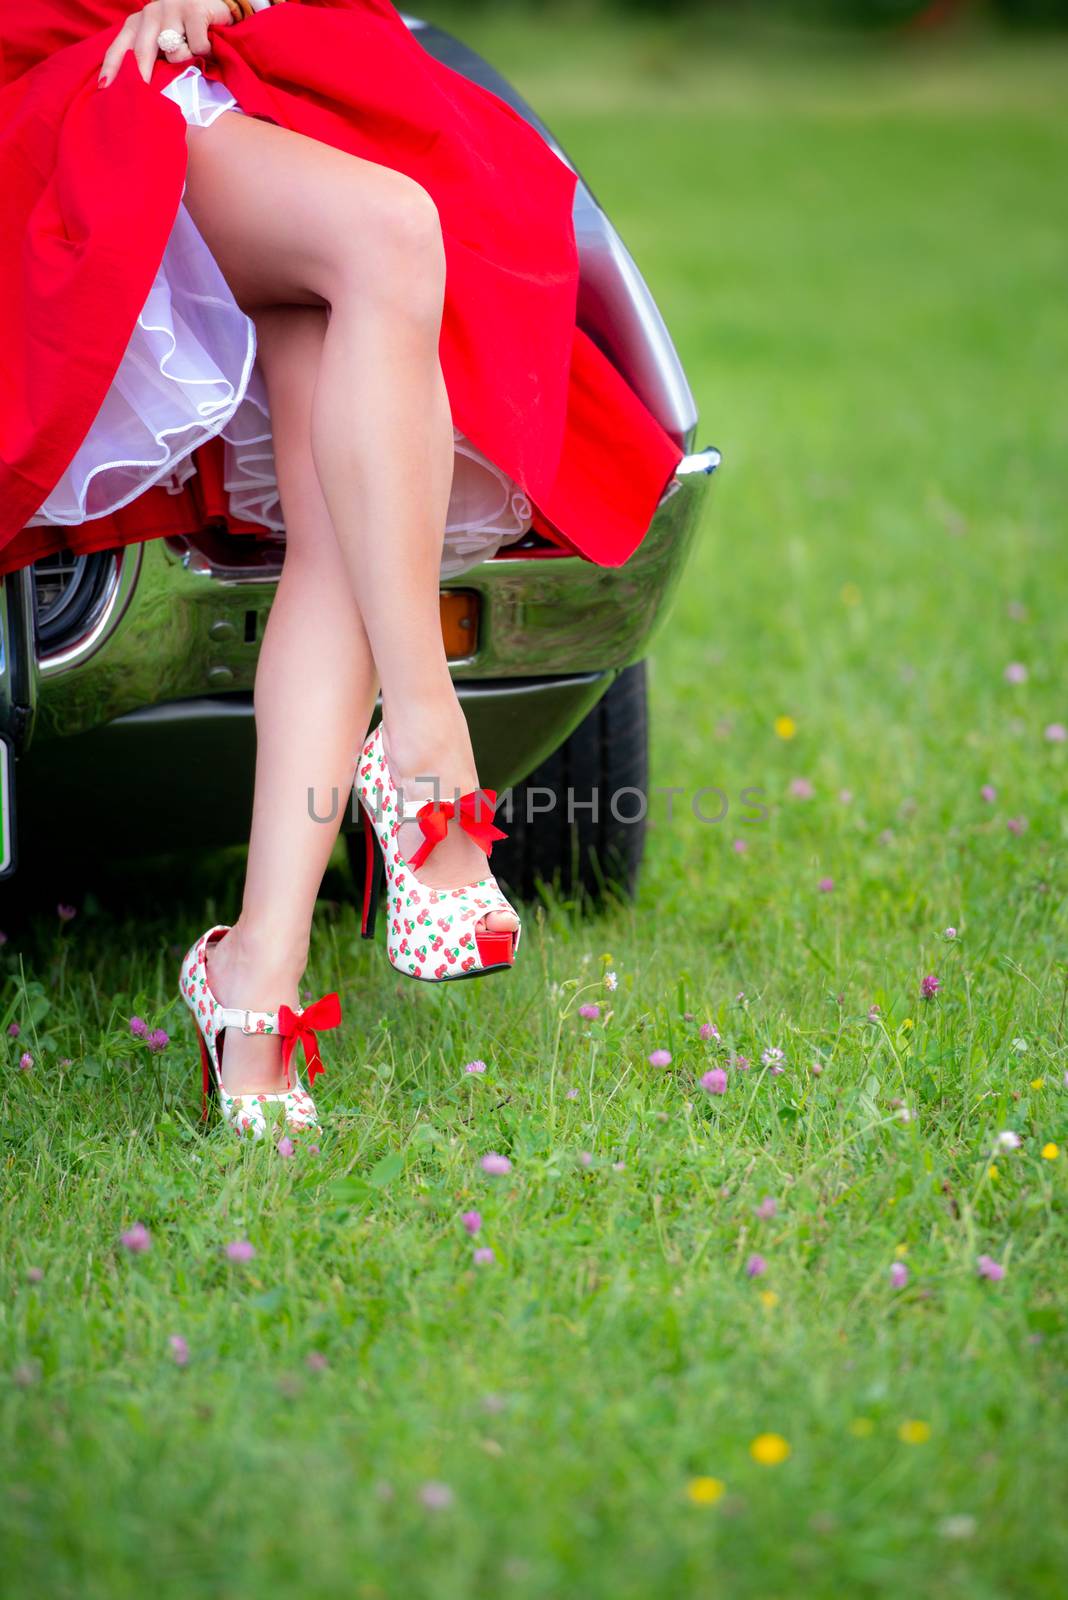 Pin Up Girl Style, young woman in red dress with long legs, wearing red high heels stilettos with cherries